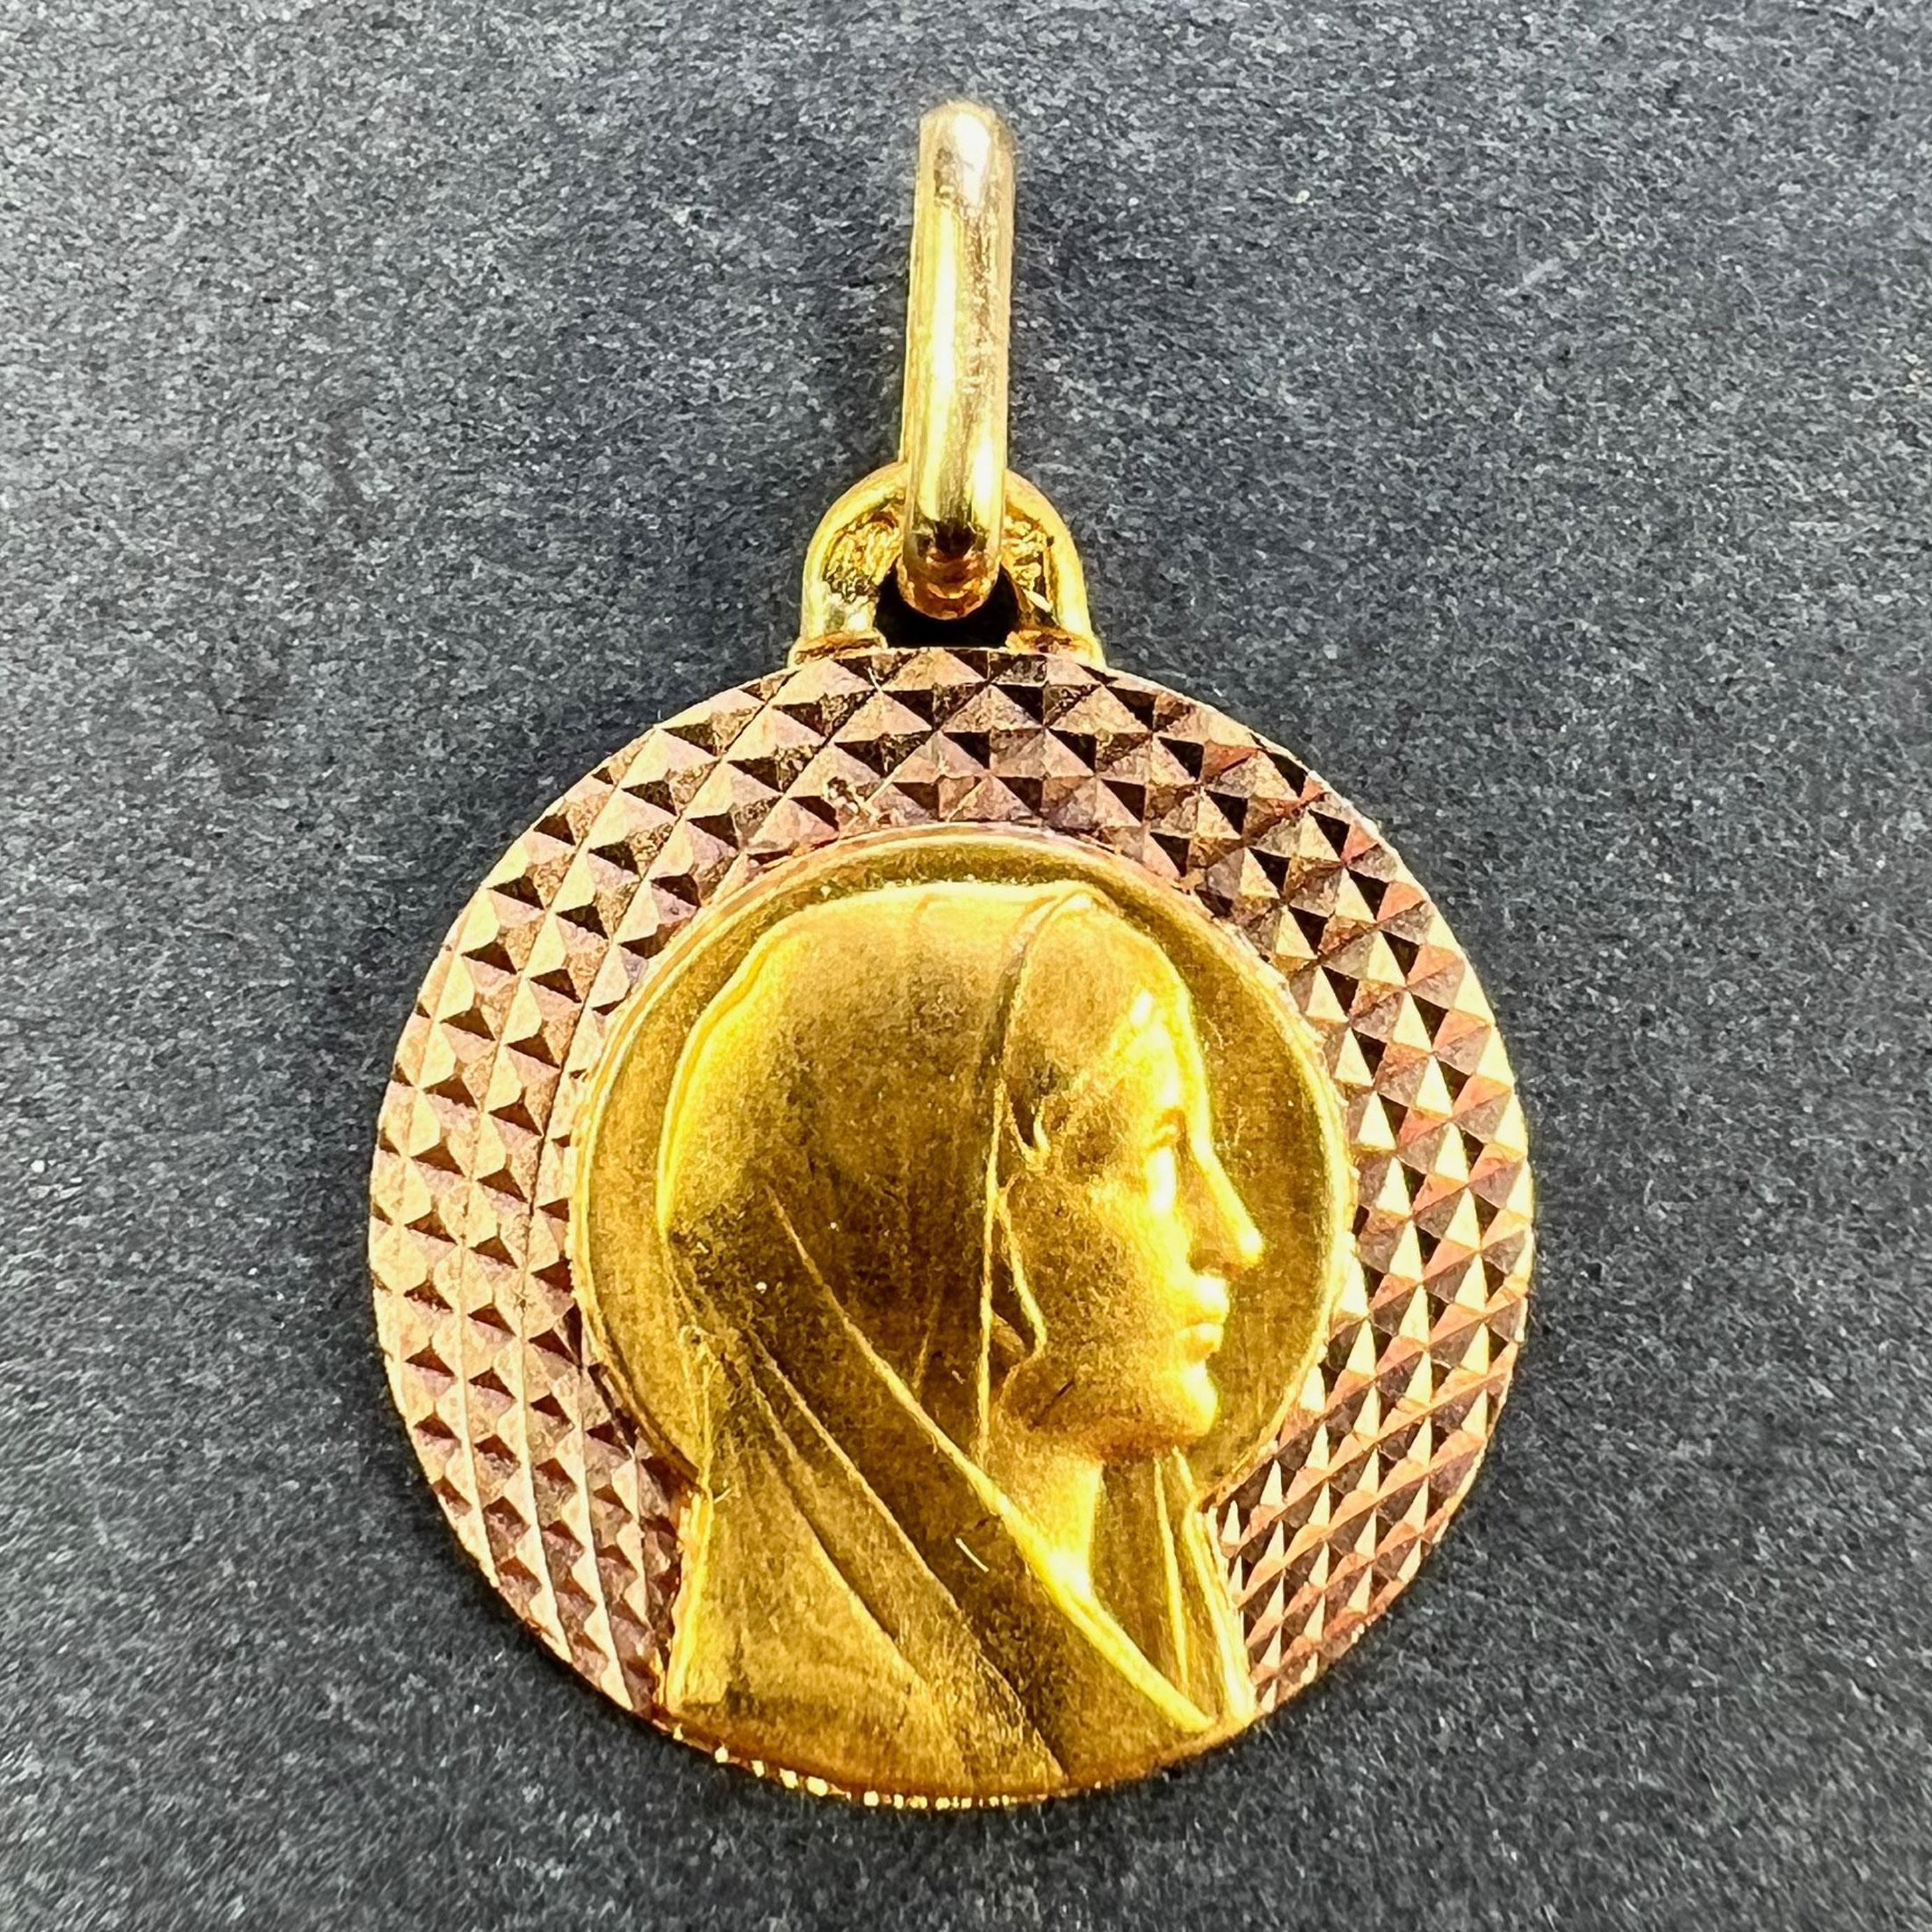 A French 18 karat (18K) yellow gold religious charm pendant designed as a medal depicting the Virgin Mary with a halo against a radiating diamond cut rose gold background. Stamped with the eagle's head mark for 18 karat gold and French manufacture